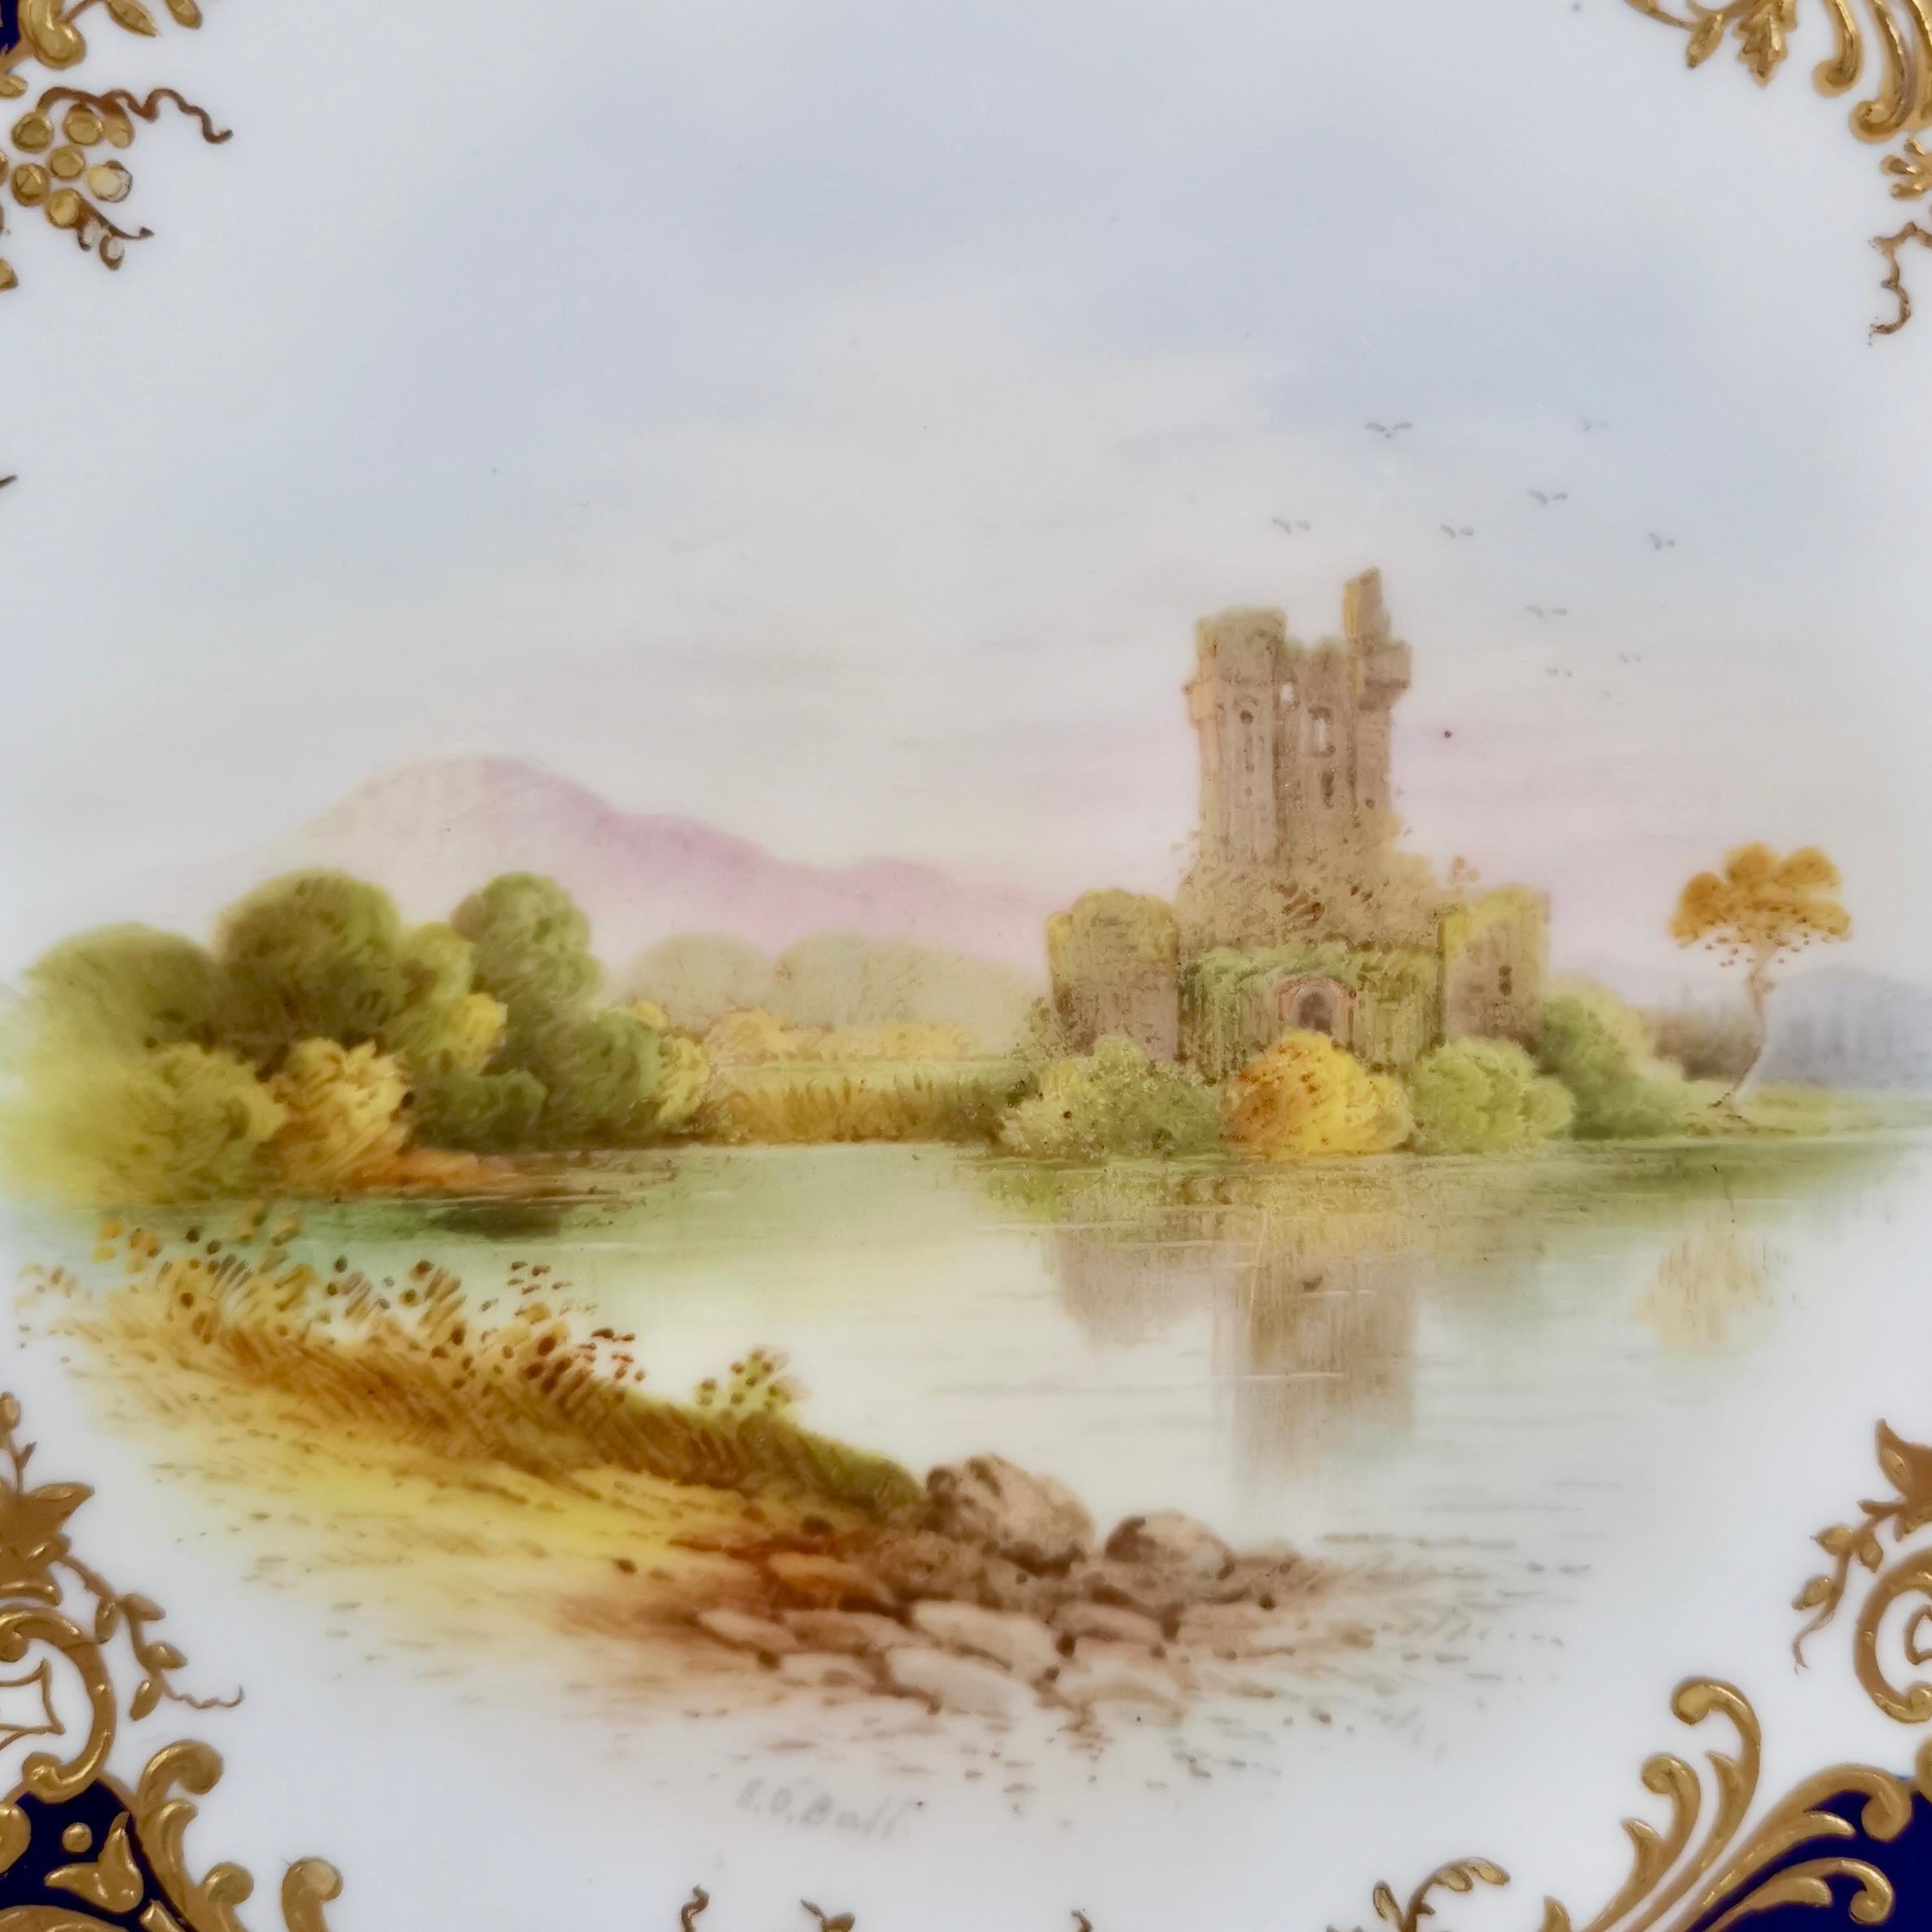 Edwardian Coalport Plate, Thomas Goode, Ross Castle by Ted Ball, 1915